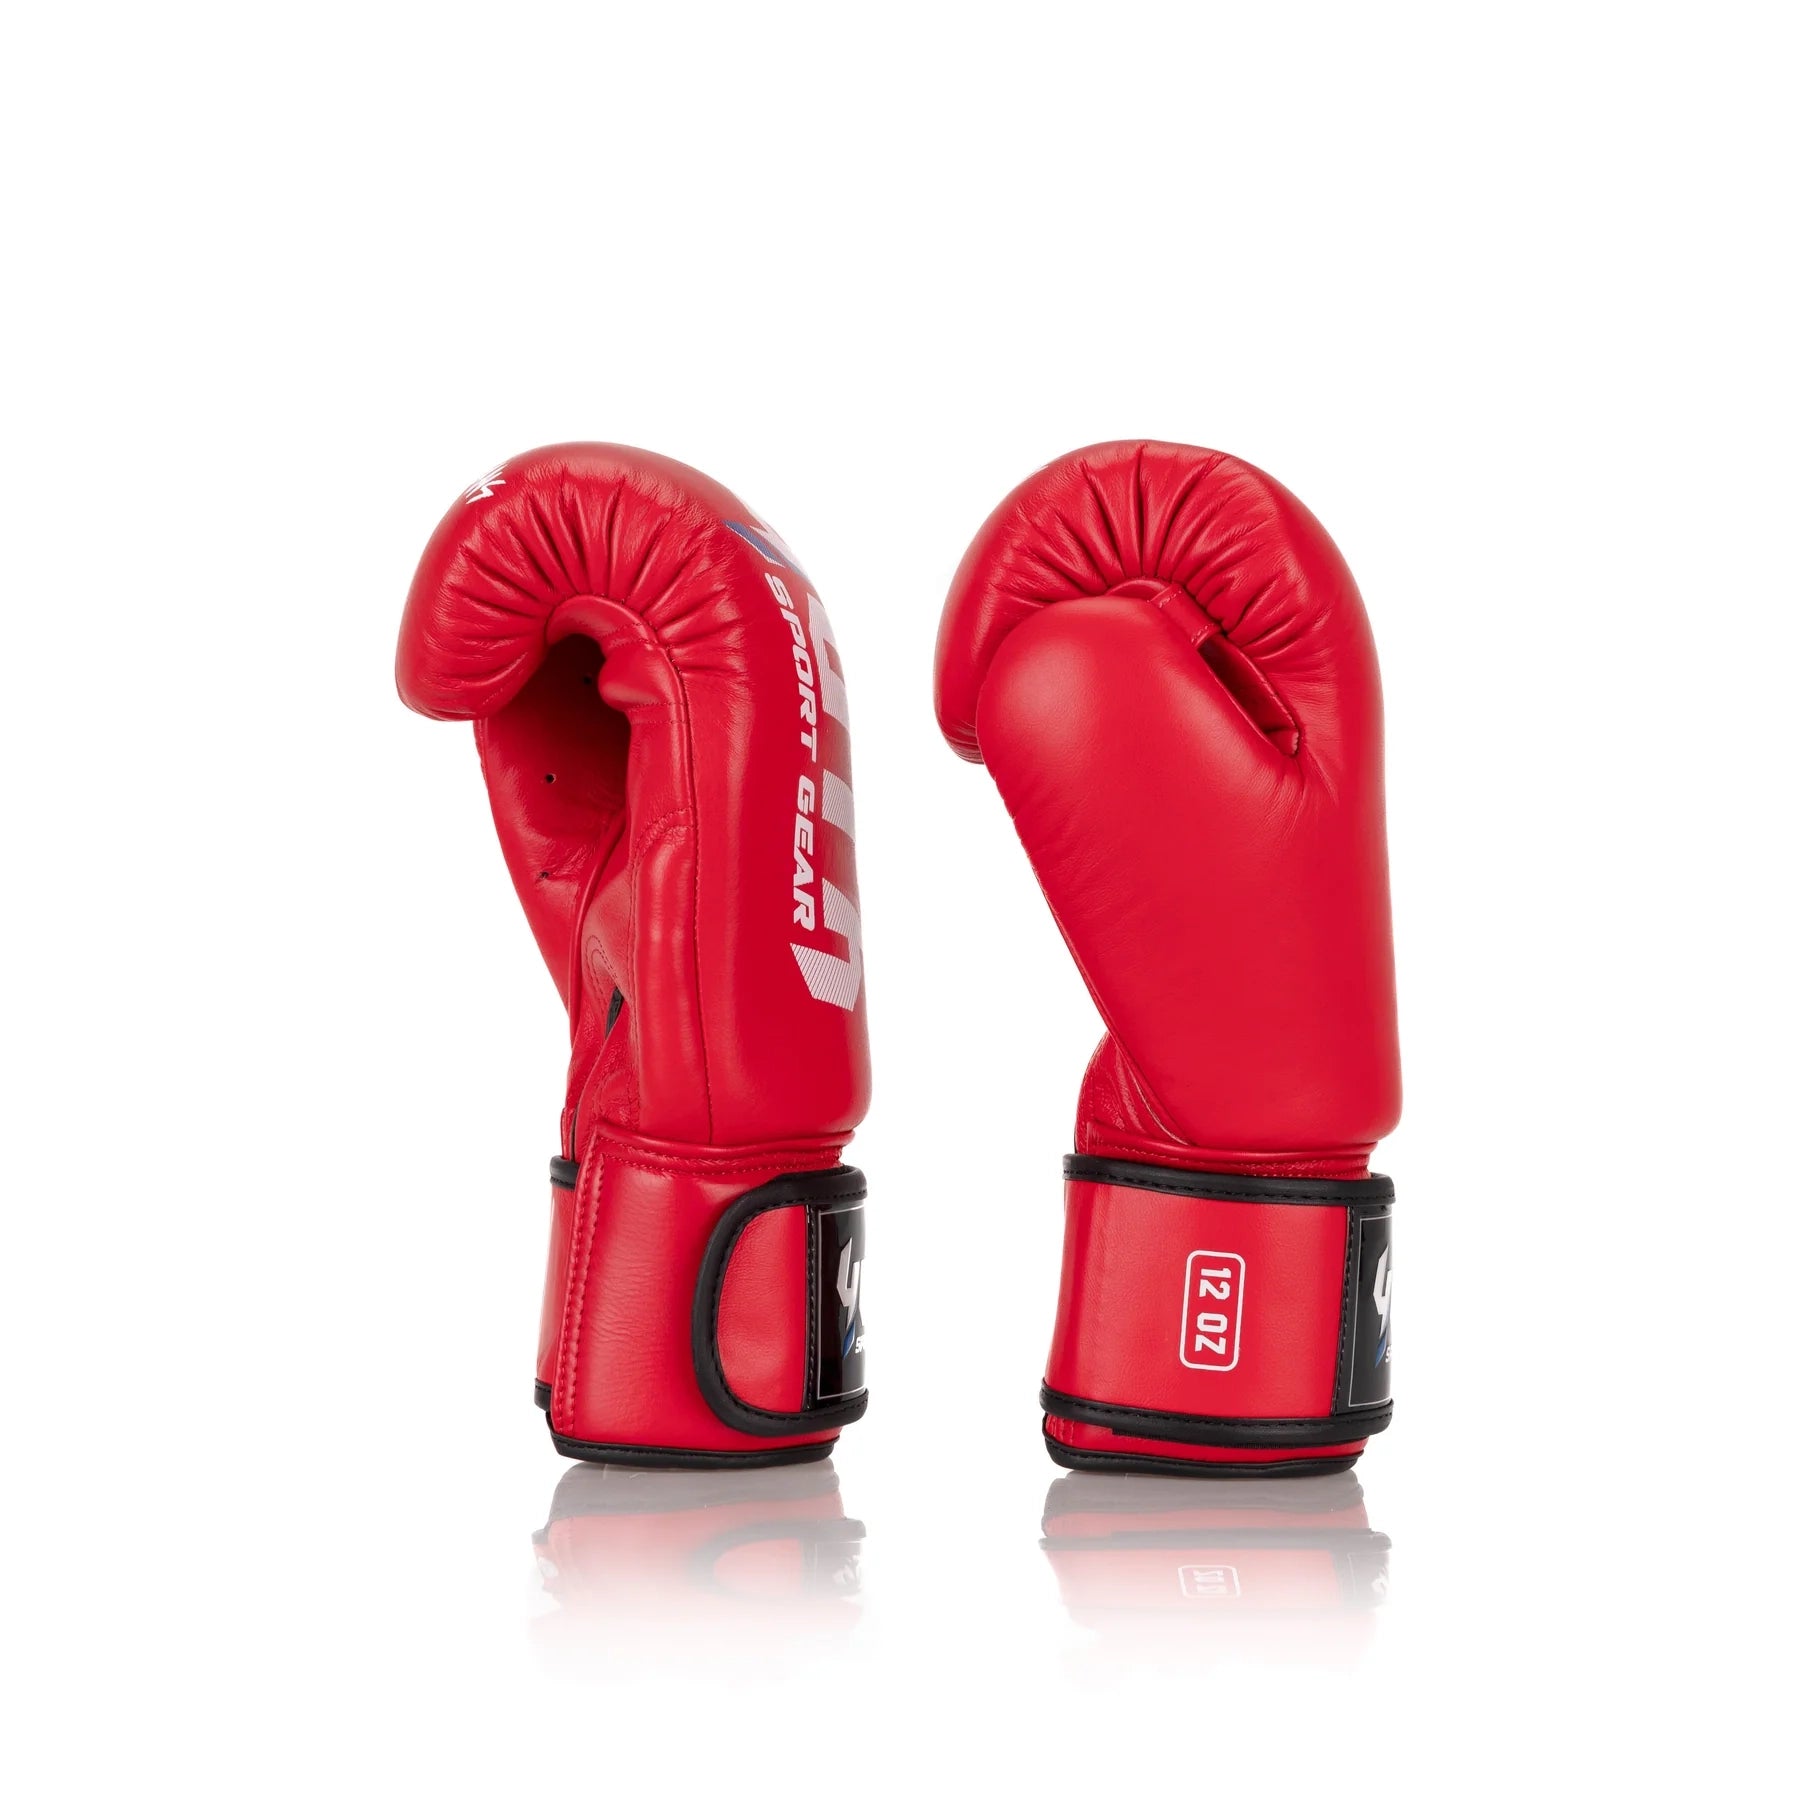 Yuth Sport Line Boxing Gloves - Fight.ShopBoxing GlovesYuthClassic Red8oz